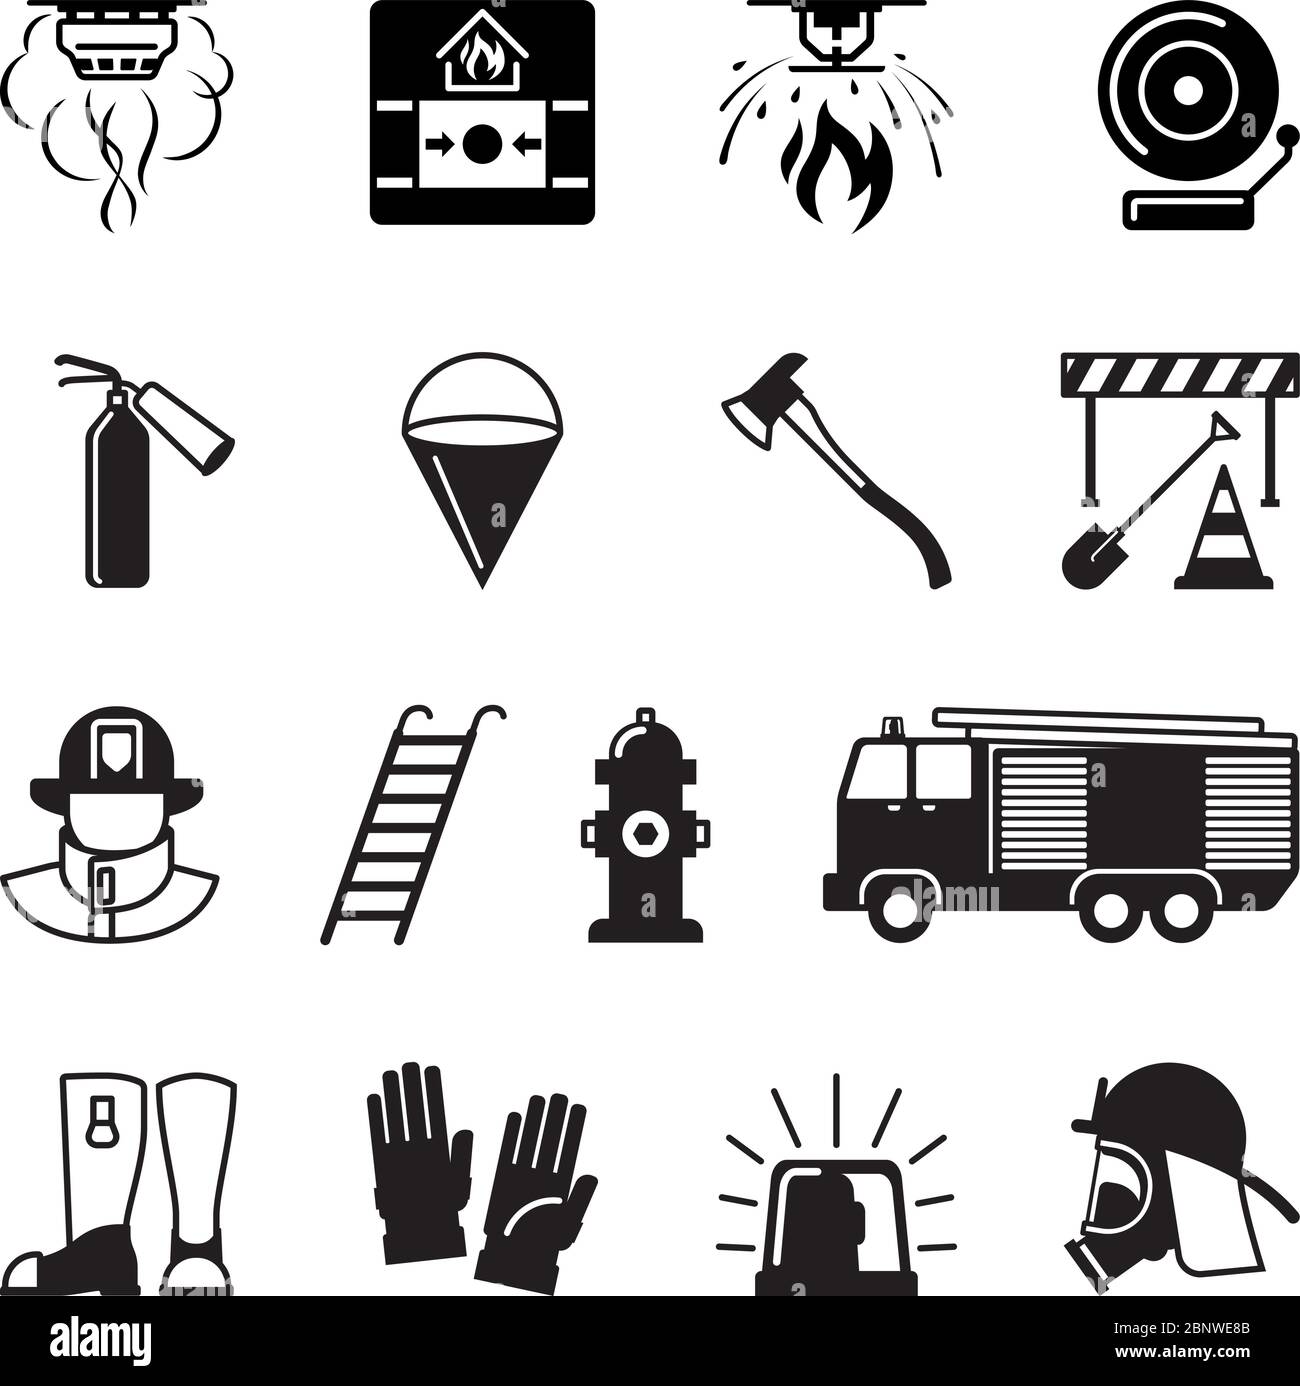 Firefighter black icons. Fireman and fire equipment, alarm and fire axe signs. Vector illustration Stock Vector